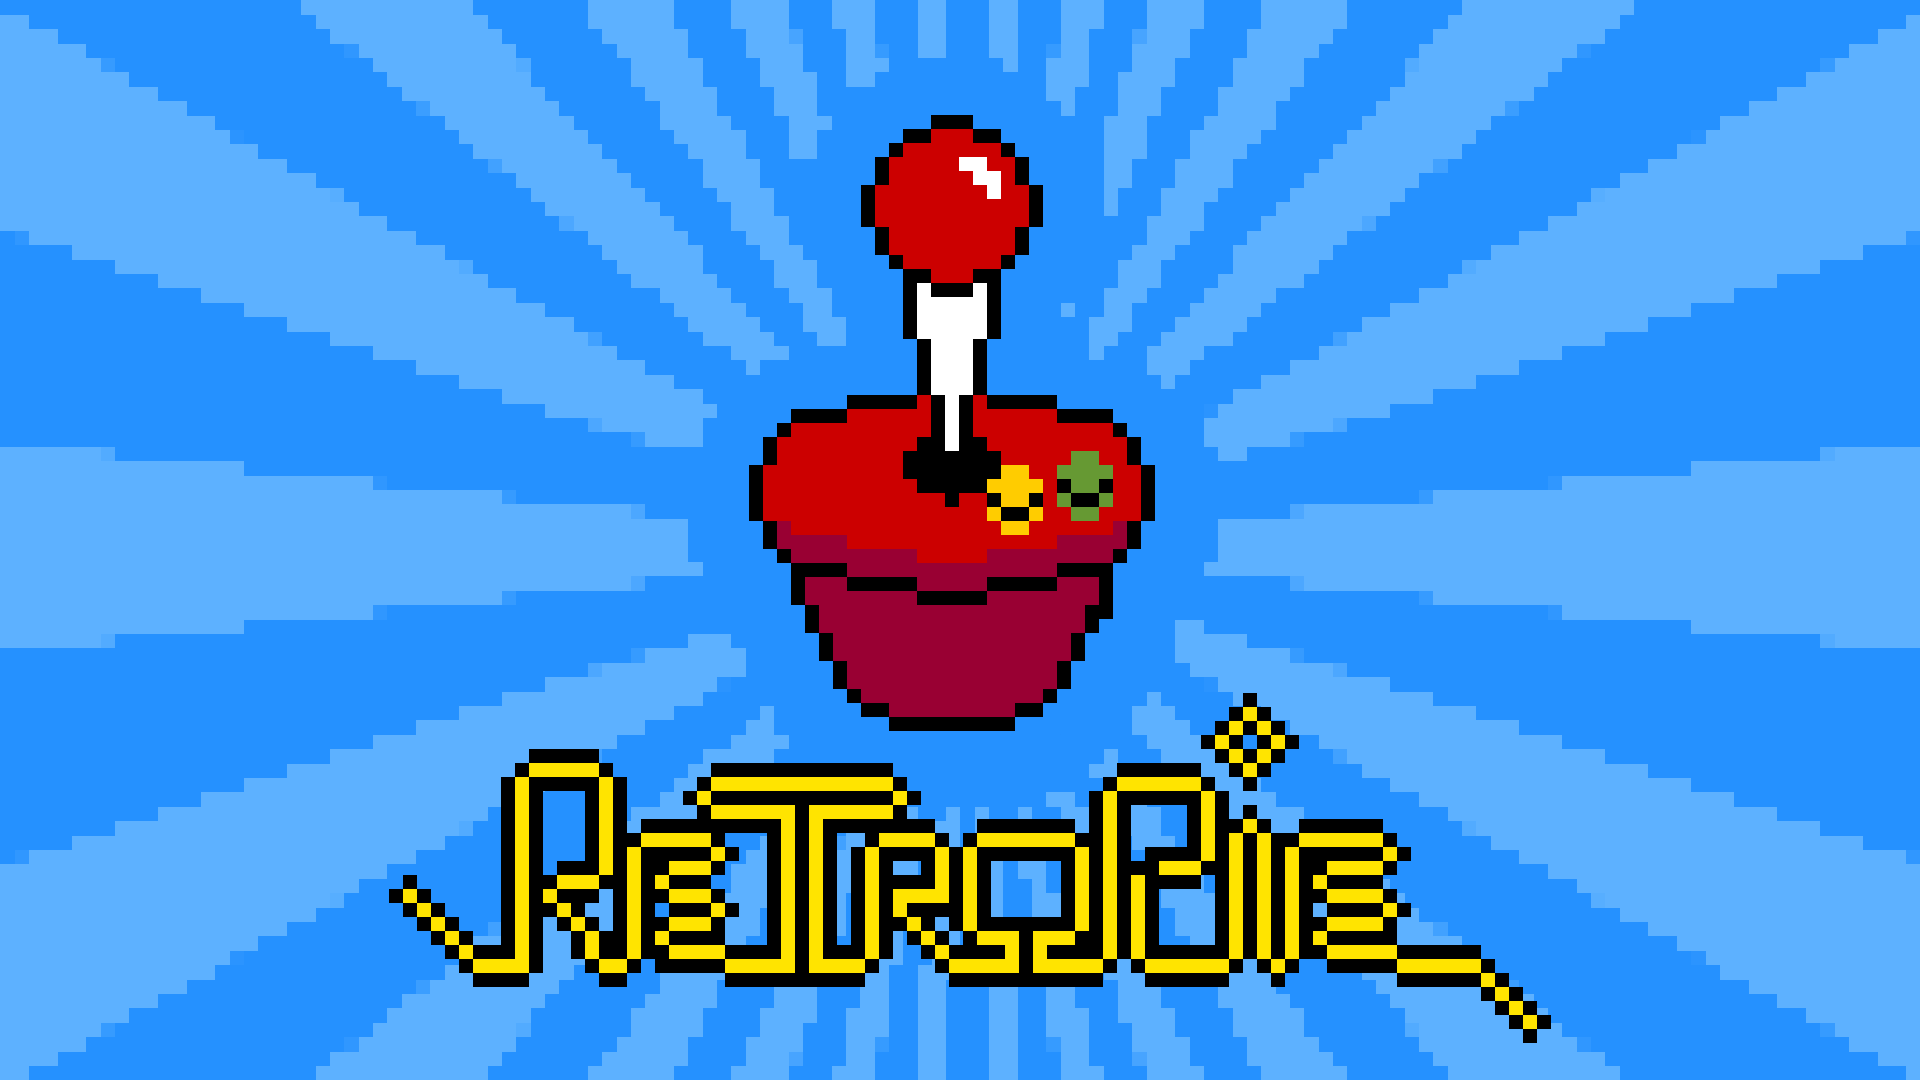 What’s new in RetroPie 4.8. Check out the impressive list of updates!